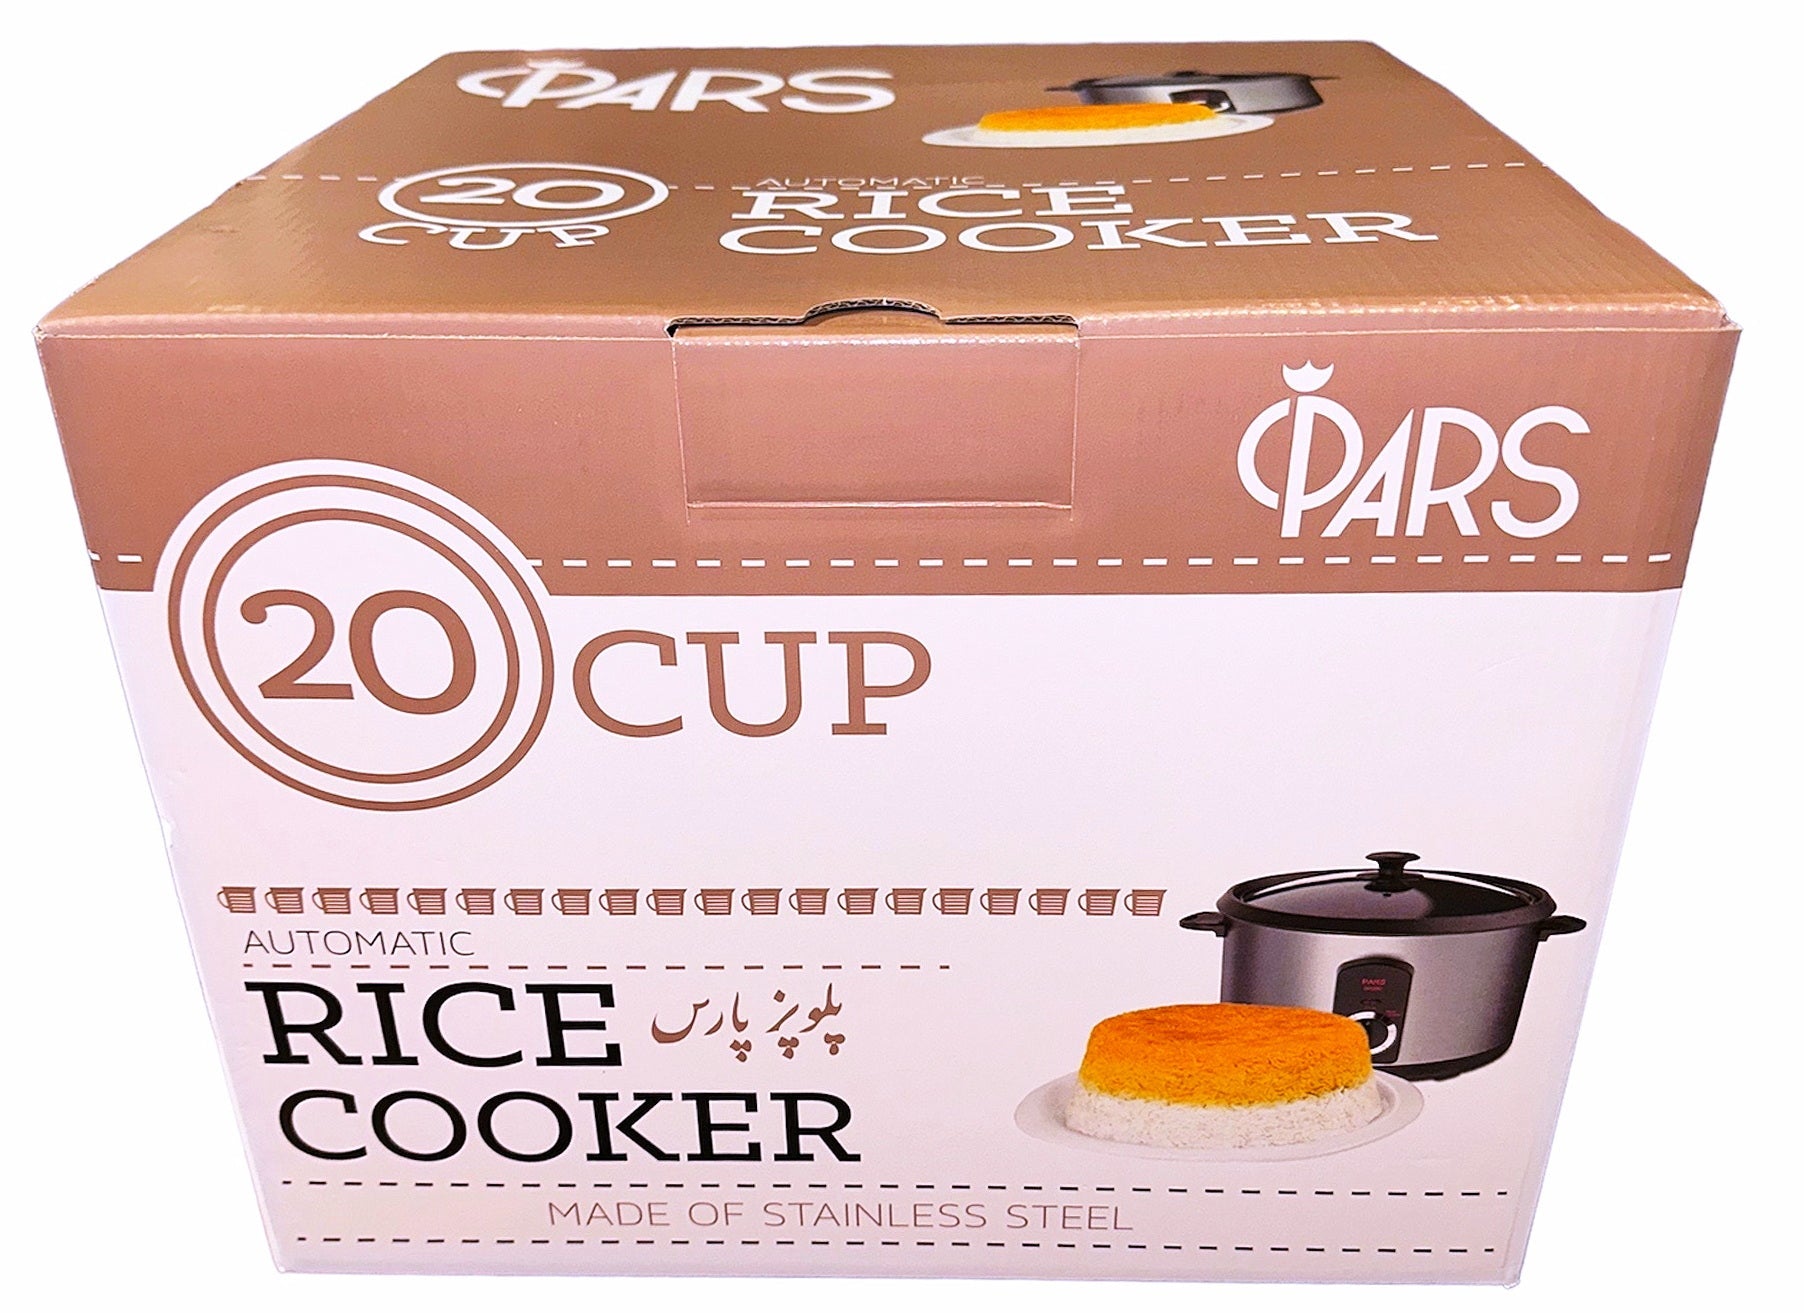 Pars inner pot replacement (for 15 cup Pars Rice Cooker, for model Number  DRC 250) INNER POT ONLY